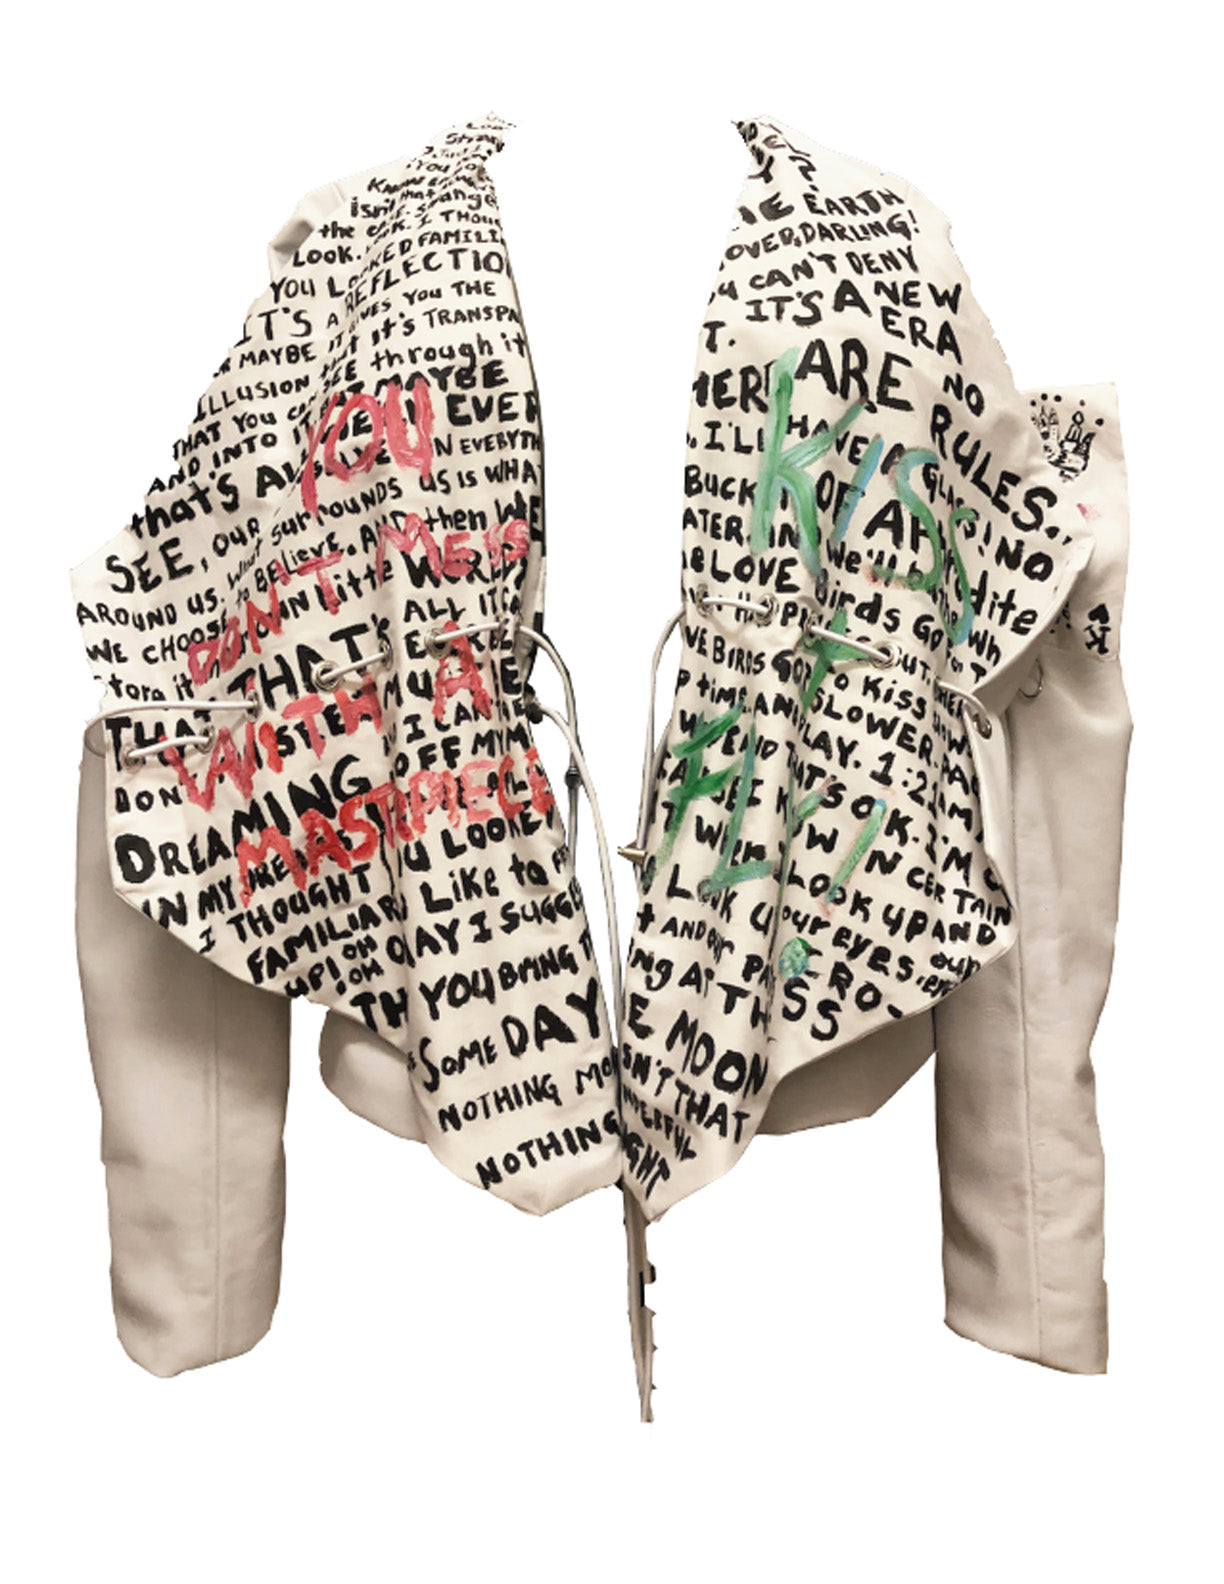 Winged "MORAL MESSAGES" White Leather Couture Jacket